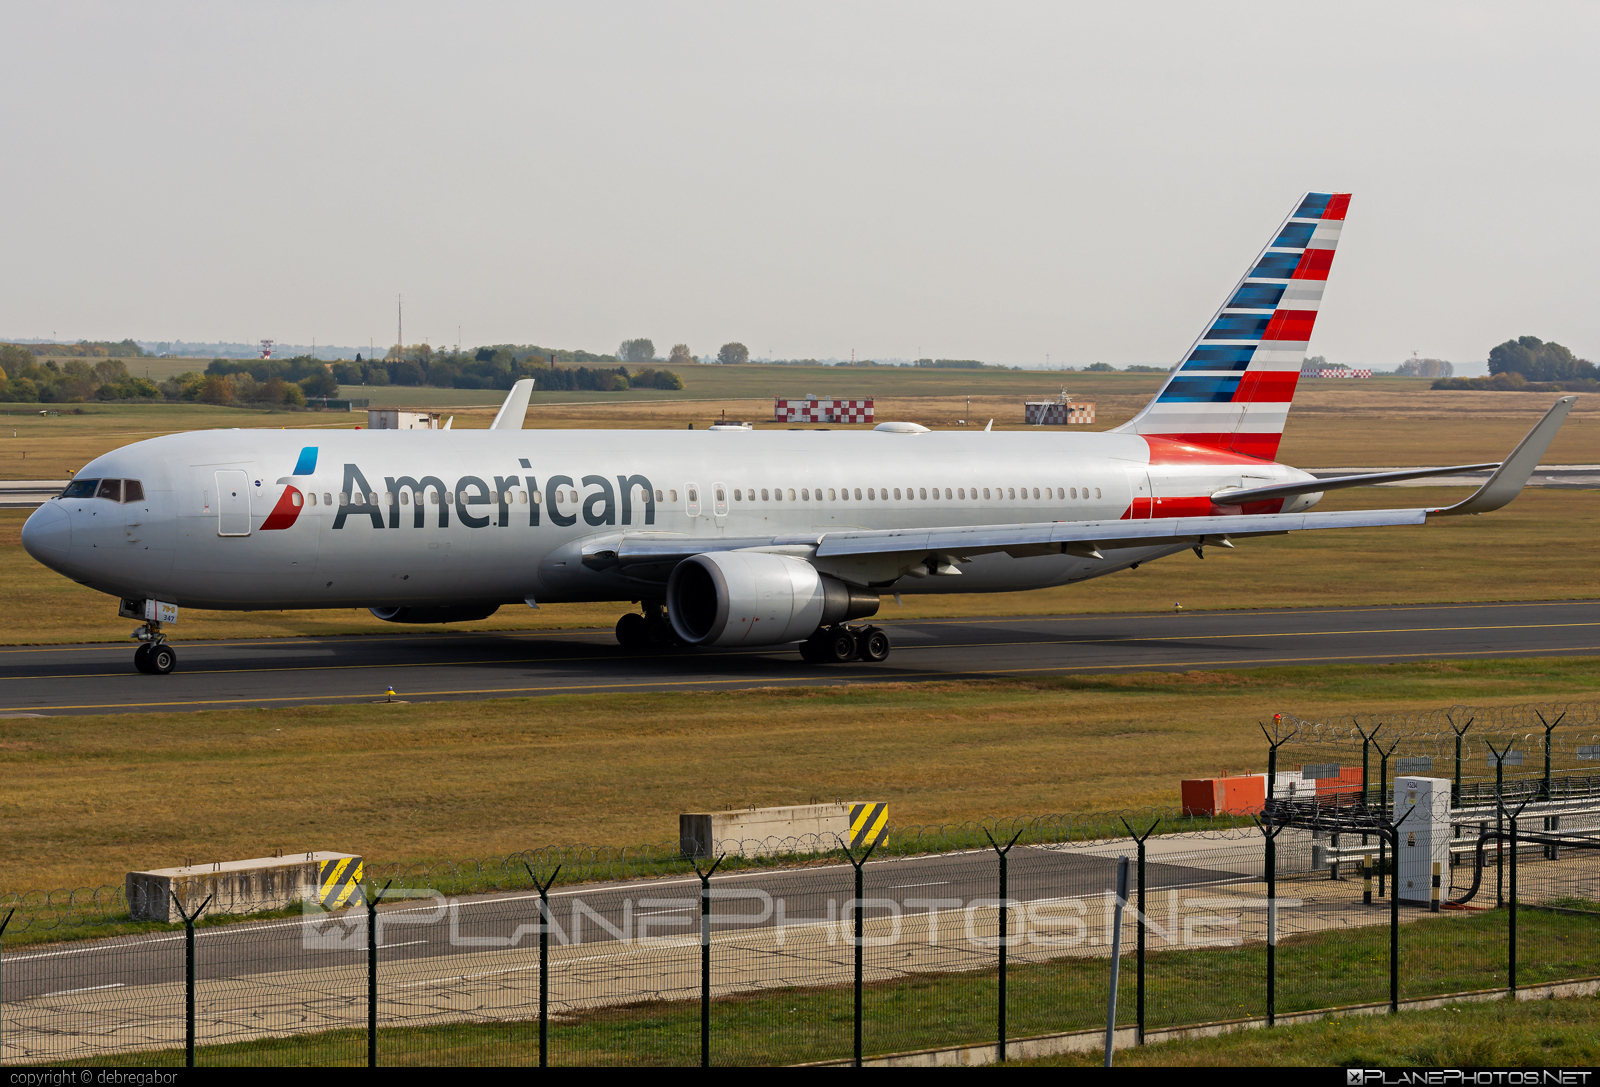 Boeing 767-300ER - N347AN operated by American Airlines #americanairlines #b767 #b767er #boeing #boeing767